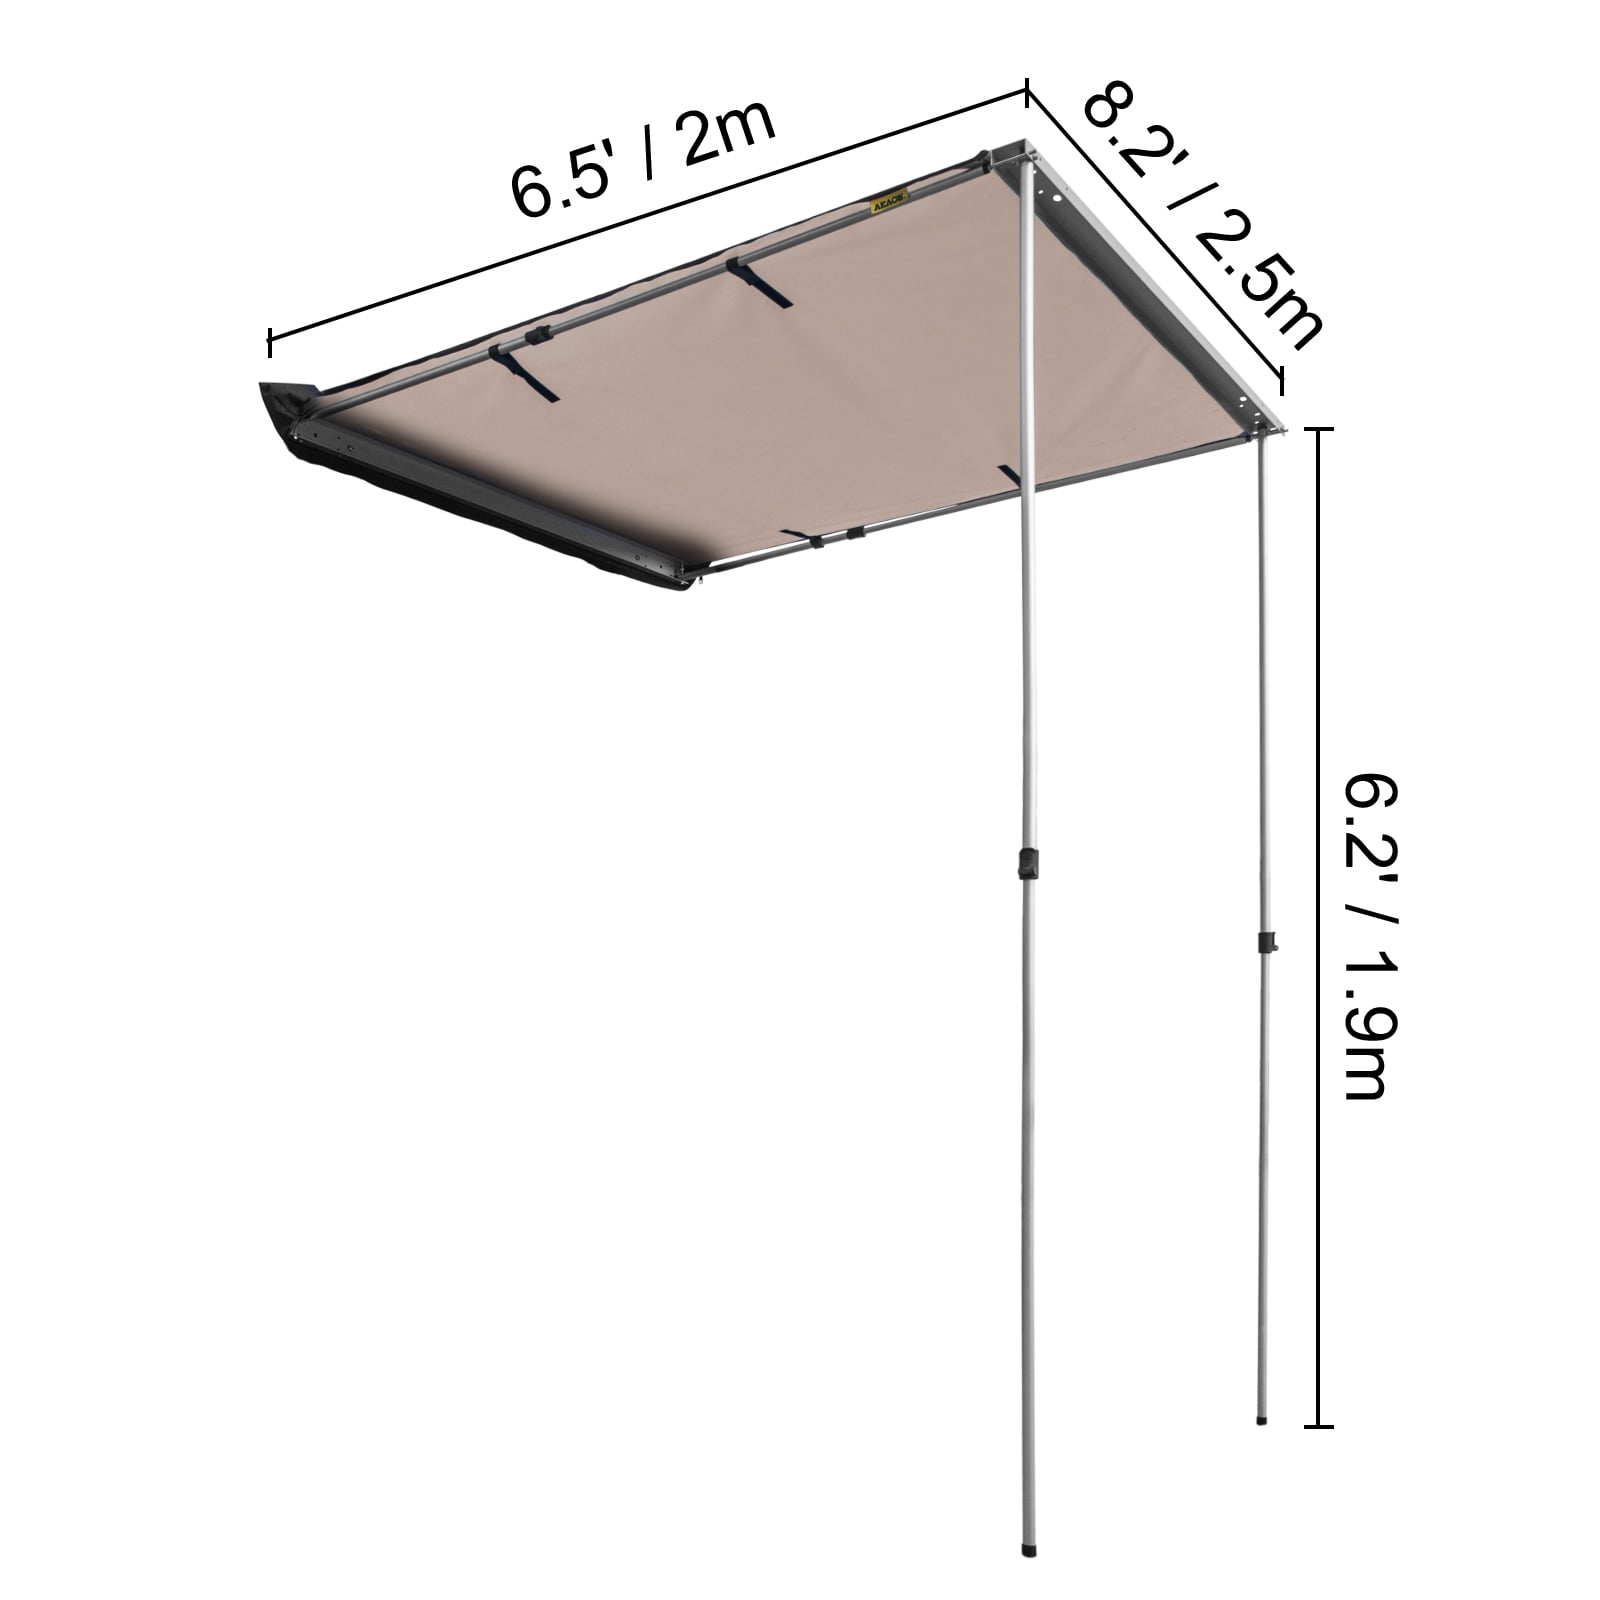 VEVOR Car Awning, 8.2'x6.5' Vehicle Awning, Pull-Out Retractable